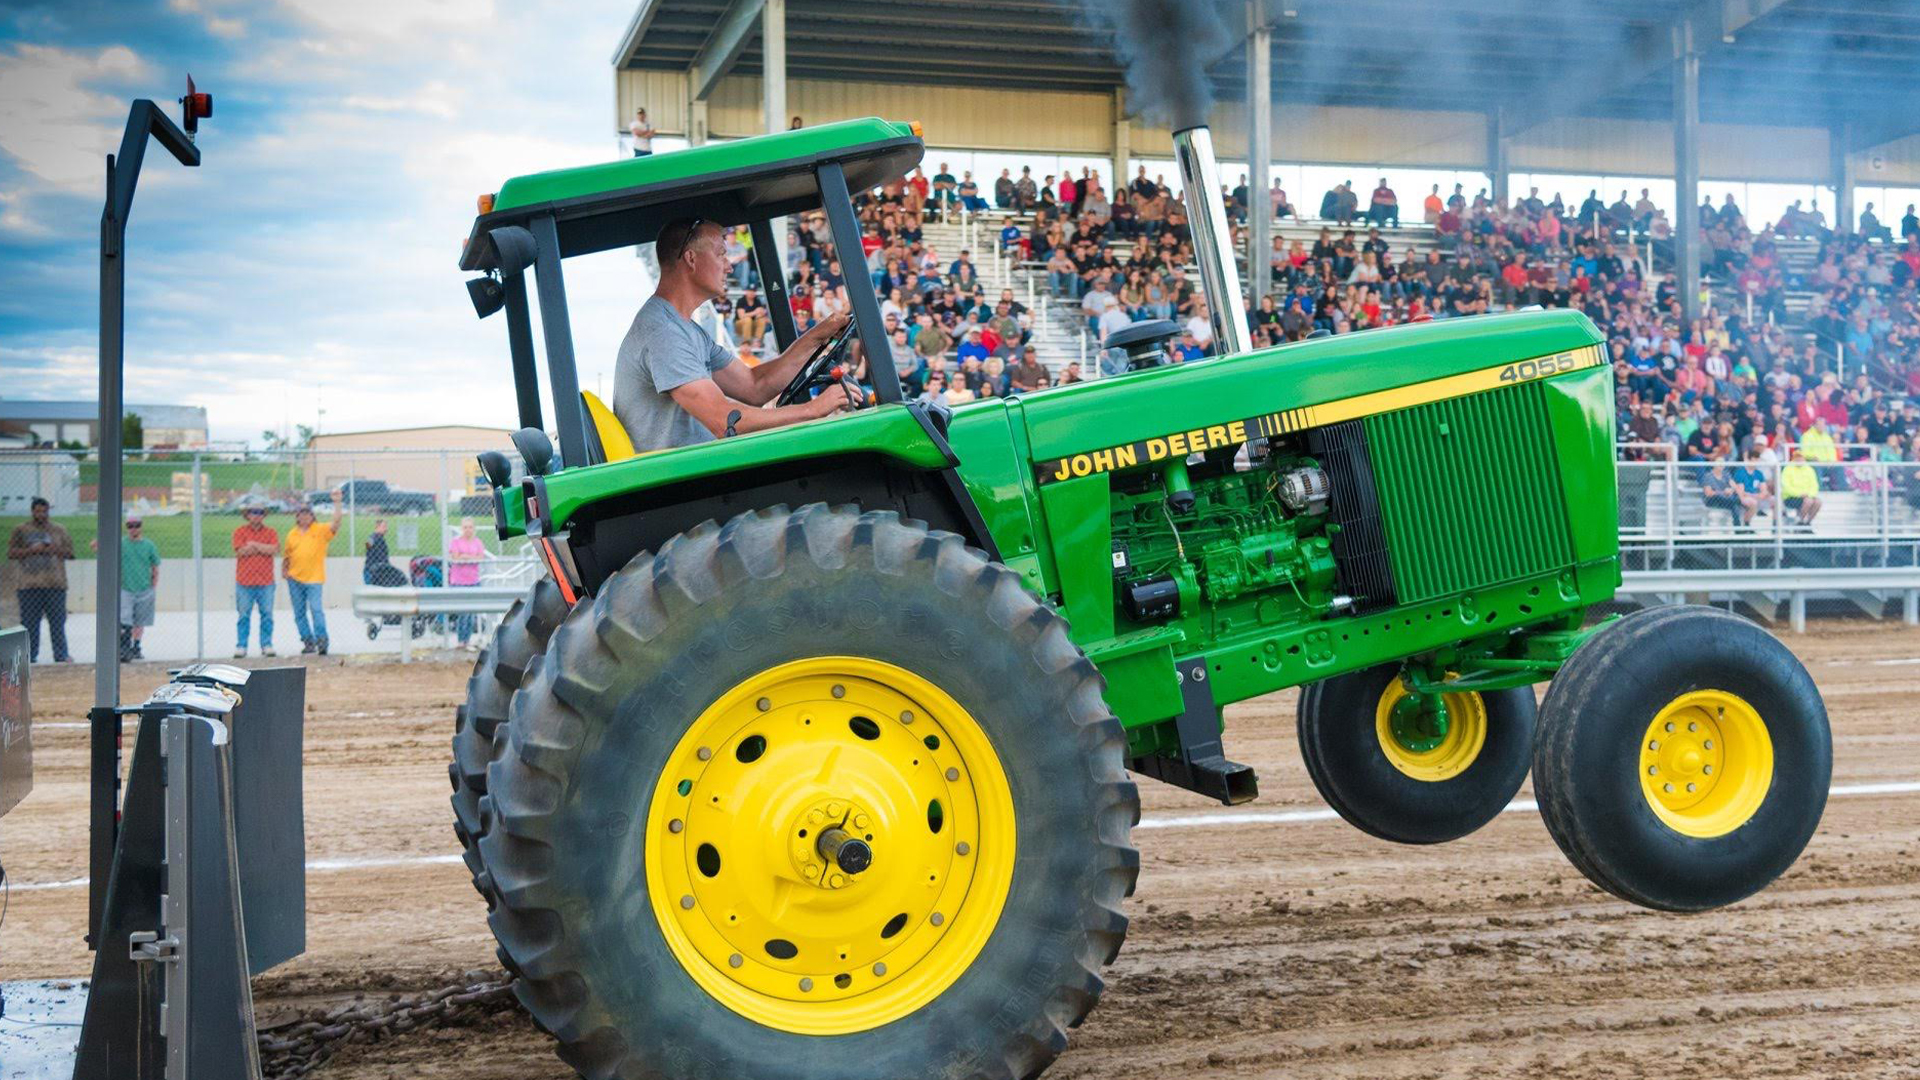 Sarpy County Fair & Rodeo Open Truck & Tractor Pull